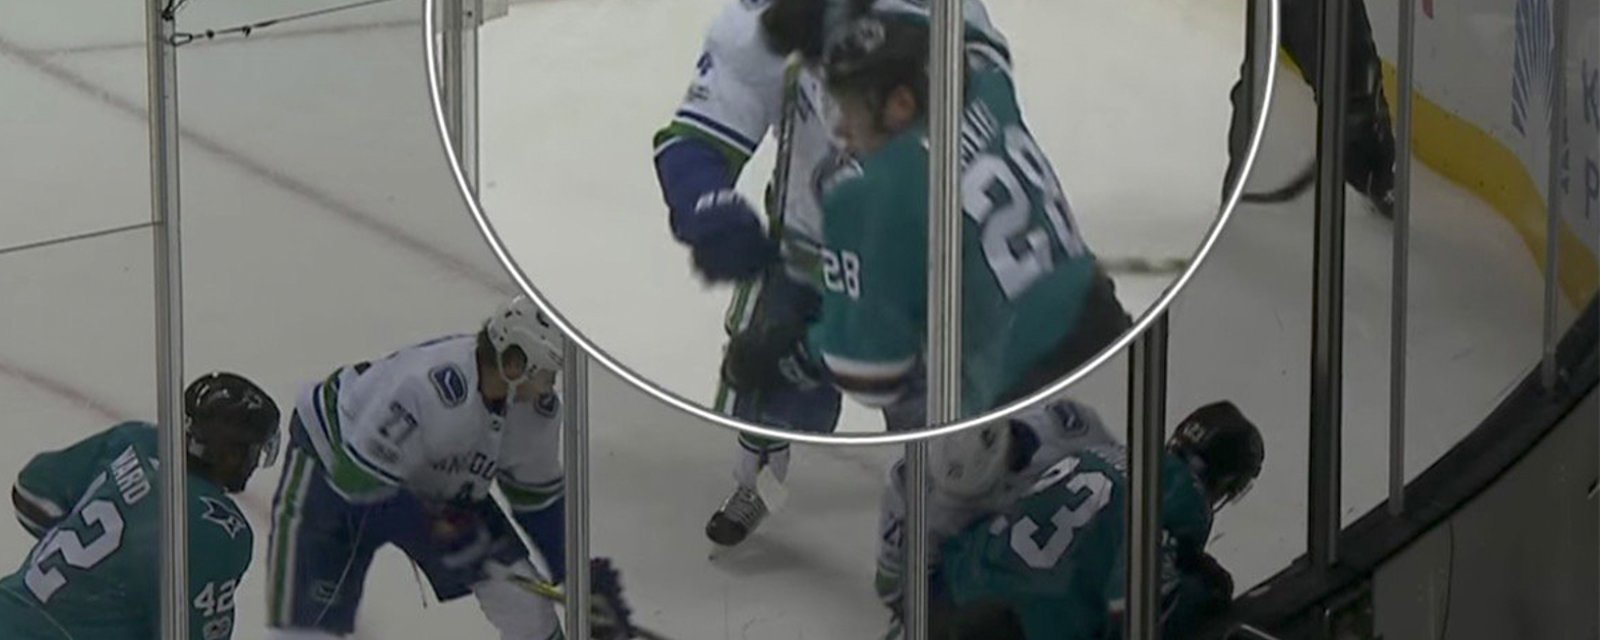 Breaking: NHL Player Safety makes another RIDICULOUS call